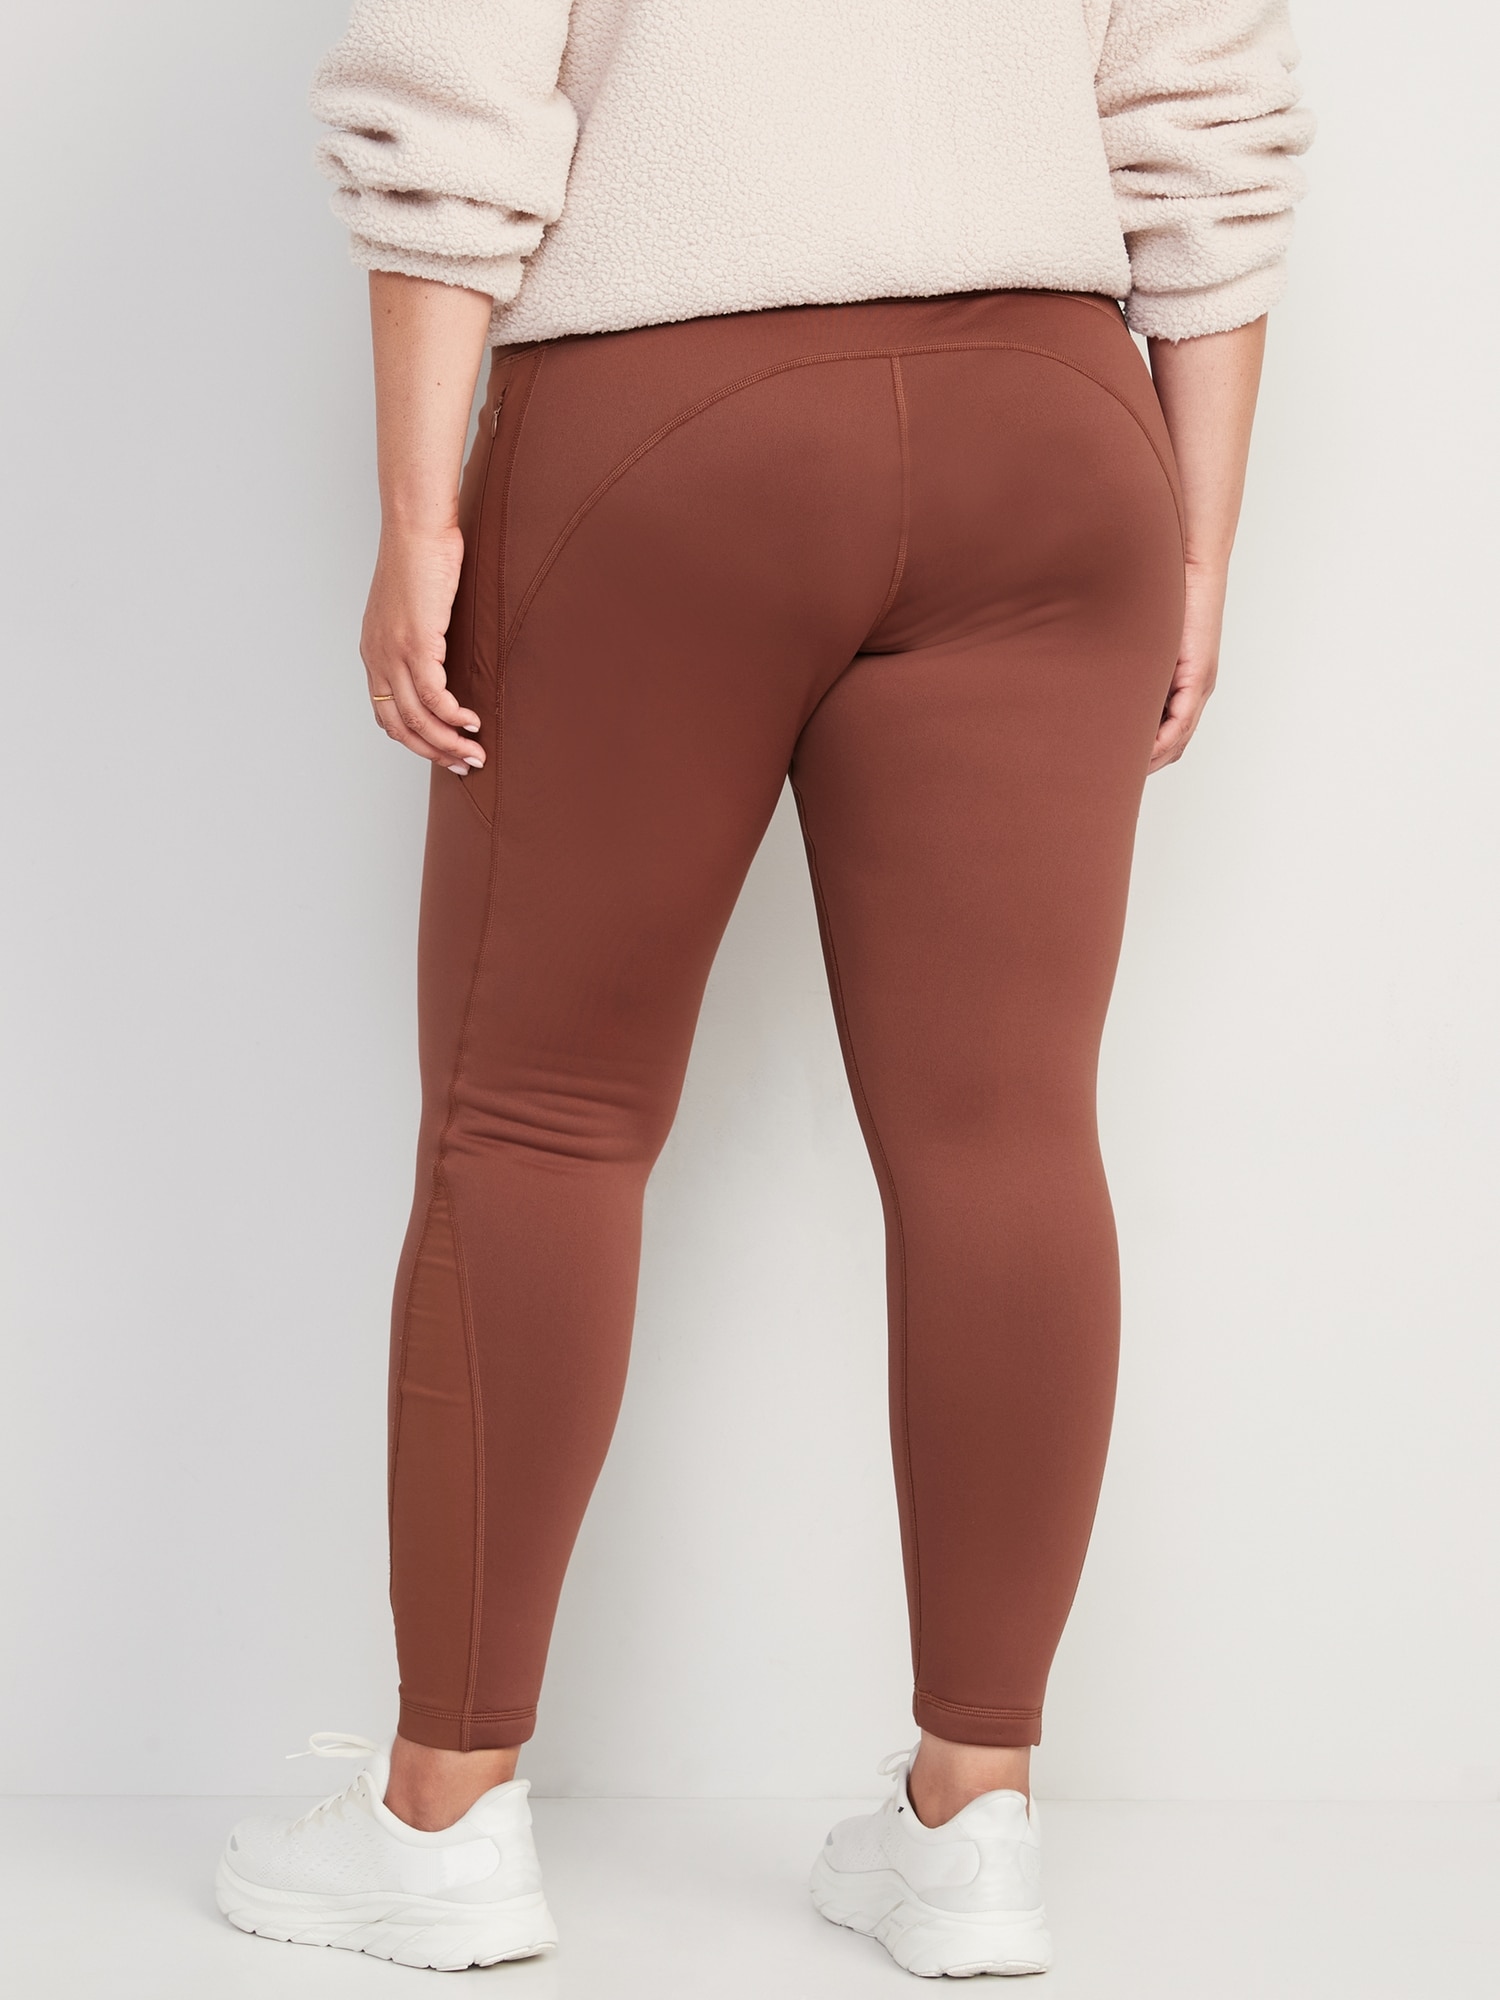 Womens Fleece Lined Winter Leggings Many Colors, Plus Size Available (S/M,  Brown)